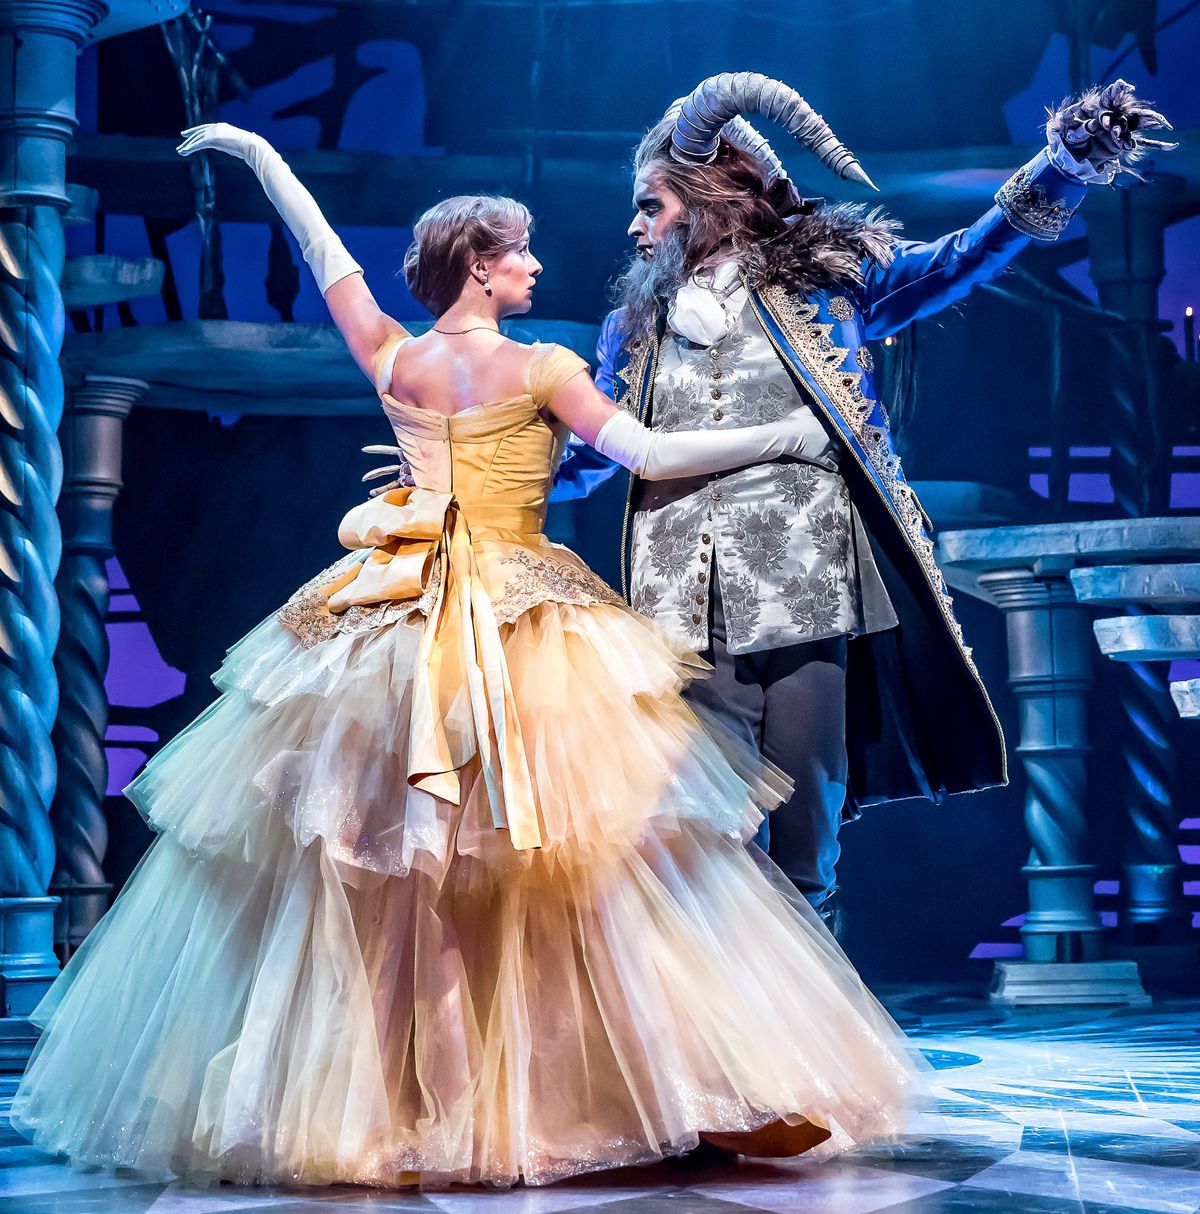 Erica Stephan and Brandon Contreras star in “Disney’s Beauty and the Beast” at the Drury Lane Theatre in Oakbrook Terrace. | Brett Beiner Photo